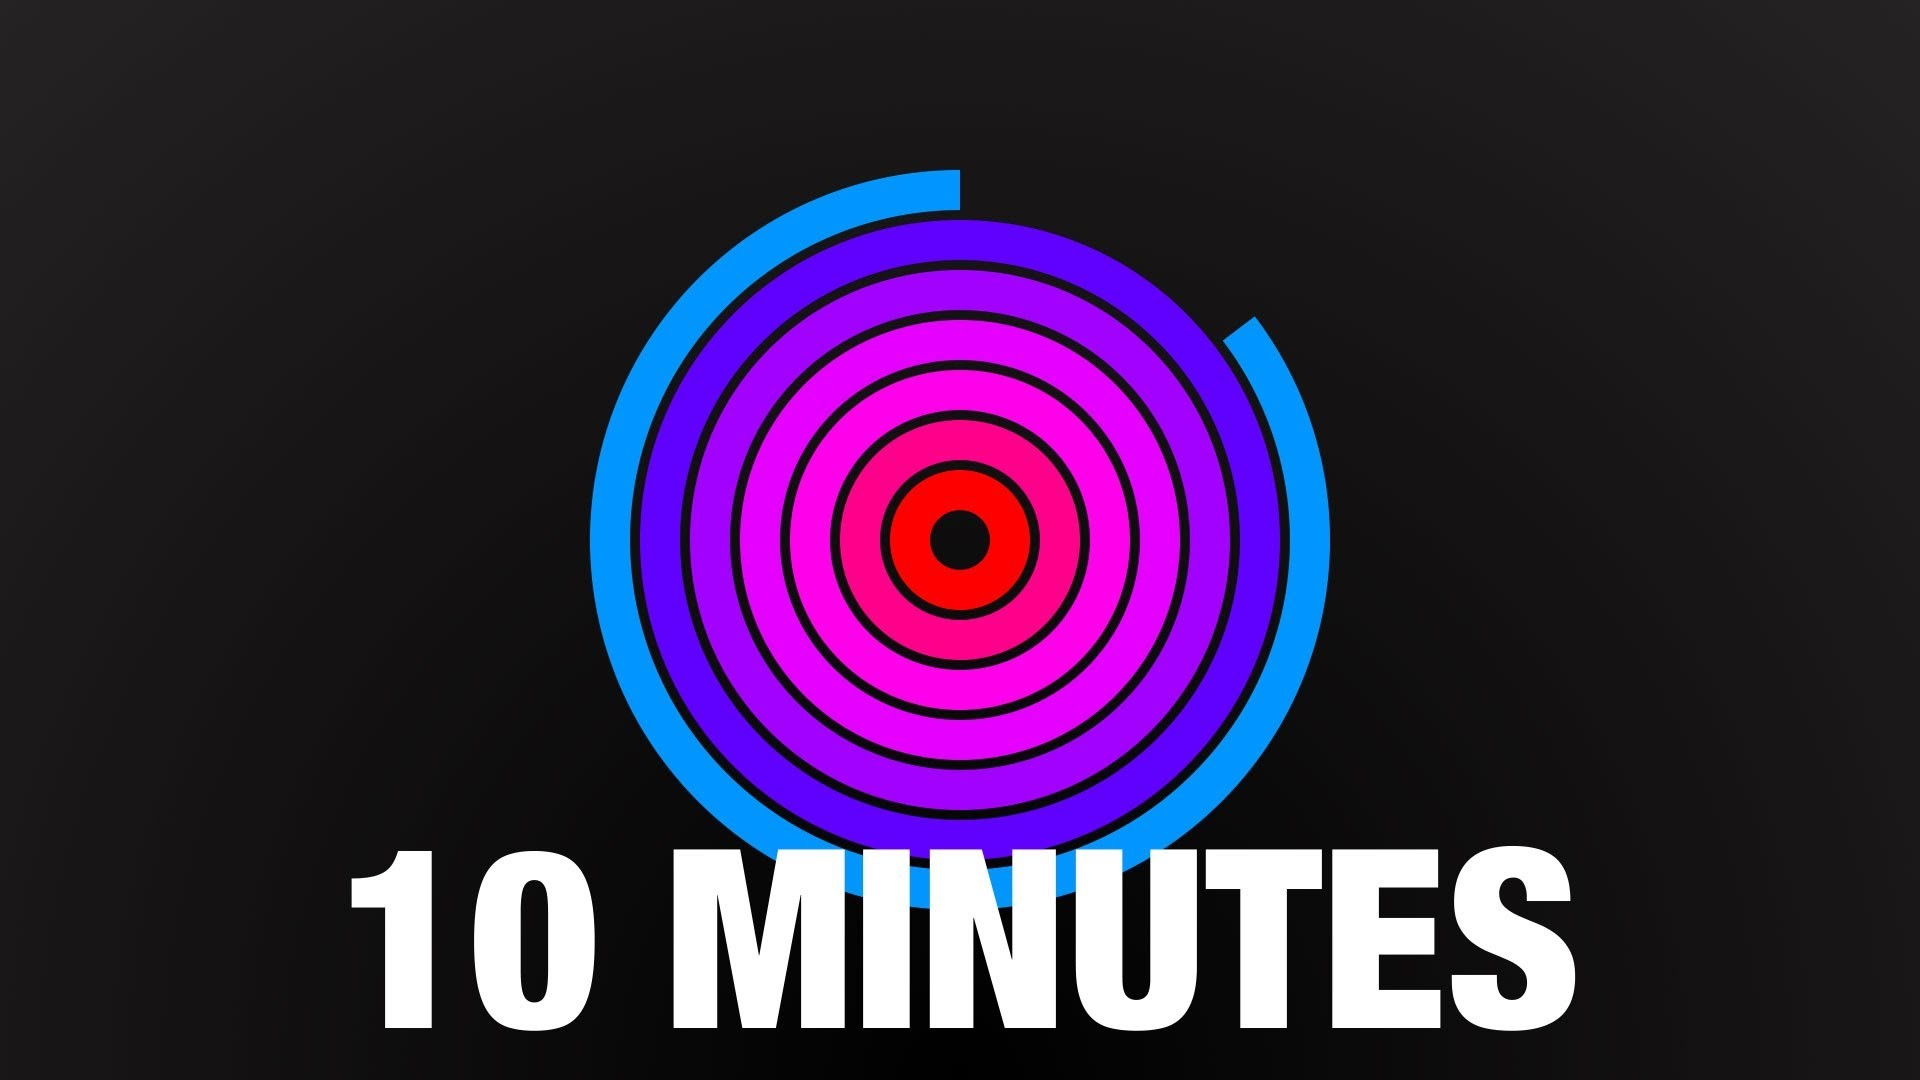 1920x1080 10 Minute Countdown Radial Timer with Beeps